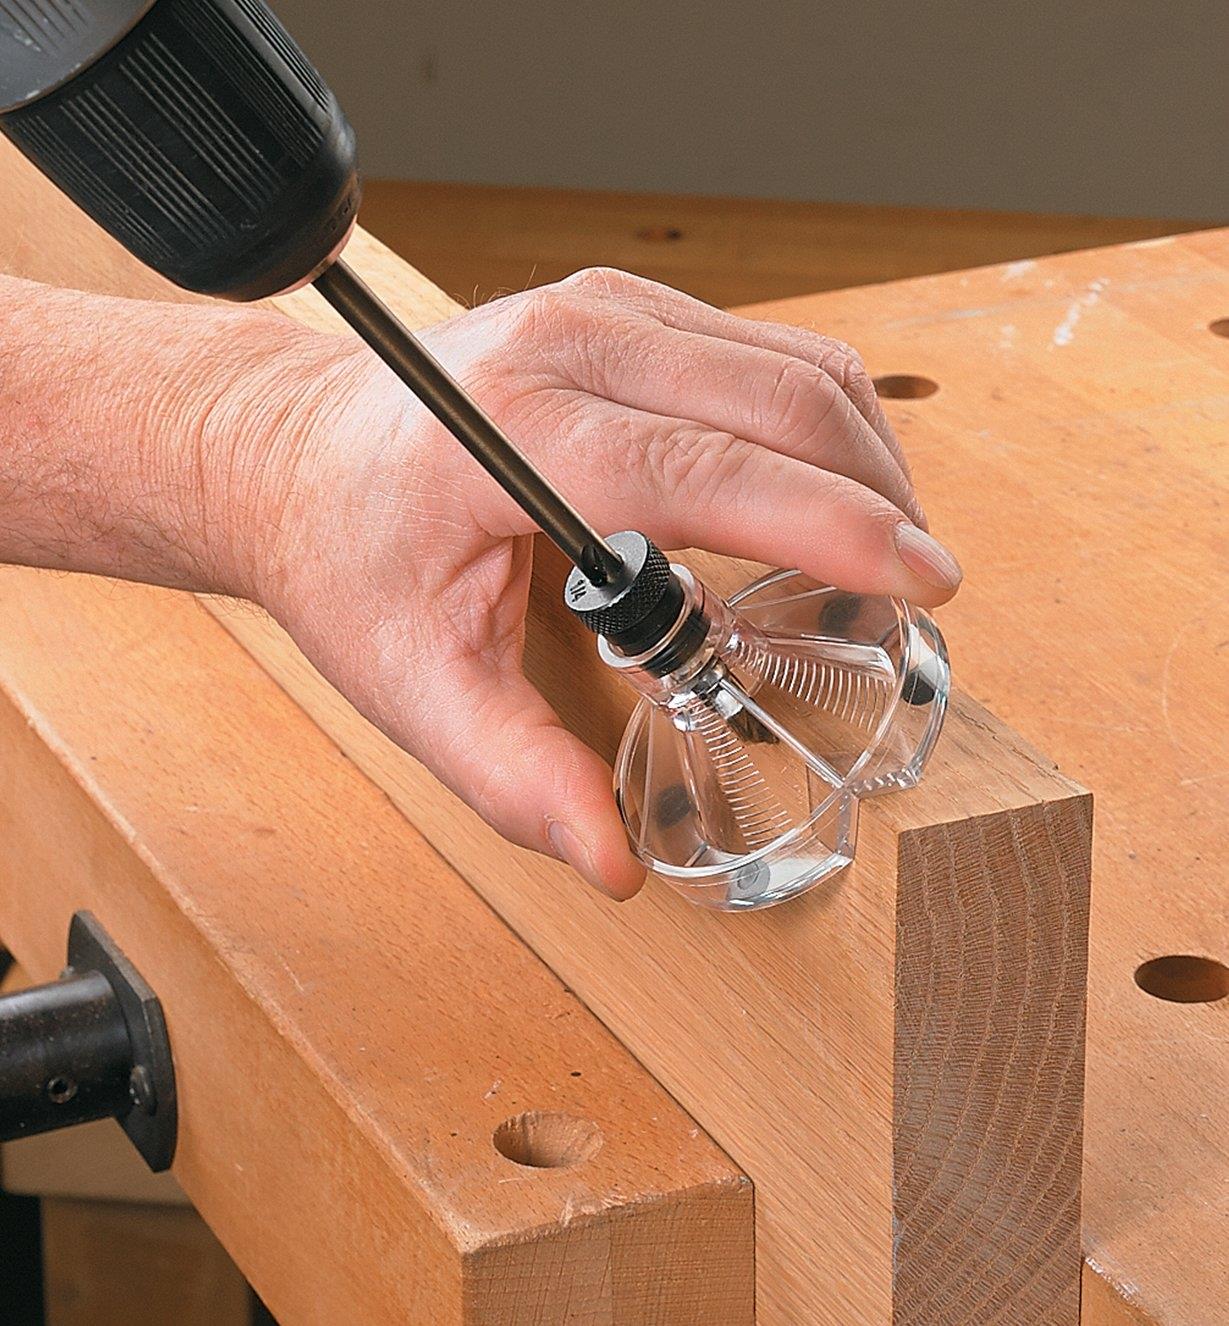 A Lee Valley drilling jig and extra-long drill bit used to drill into the corner of a piece of stock